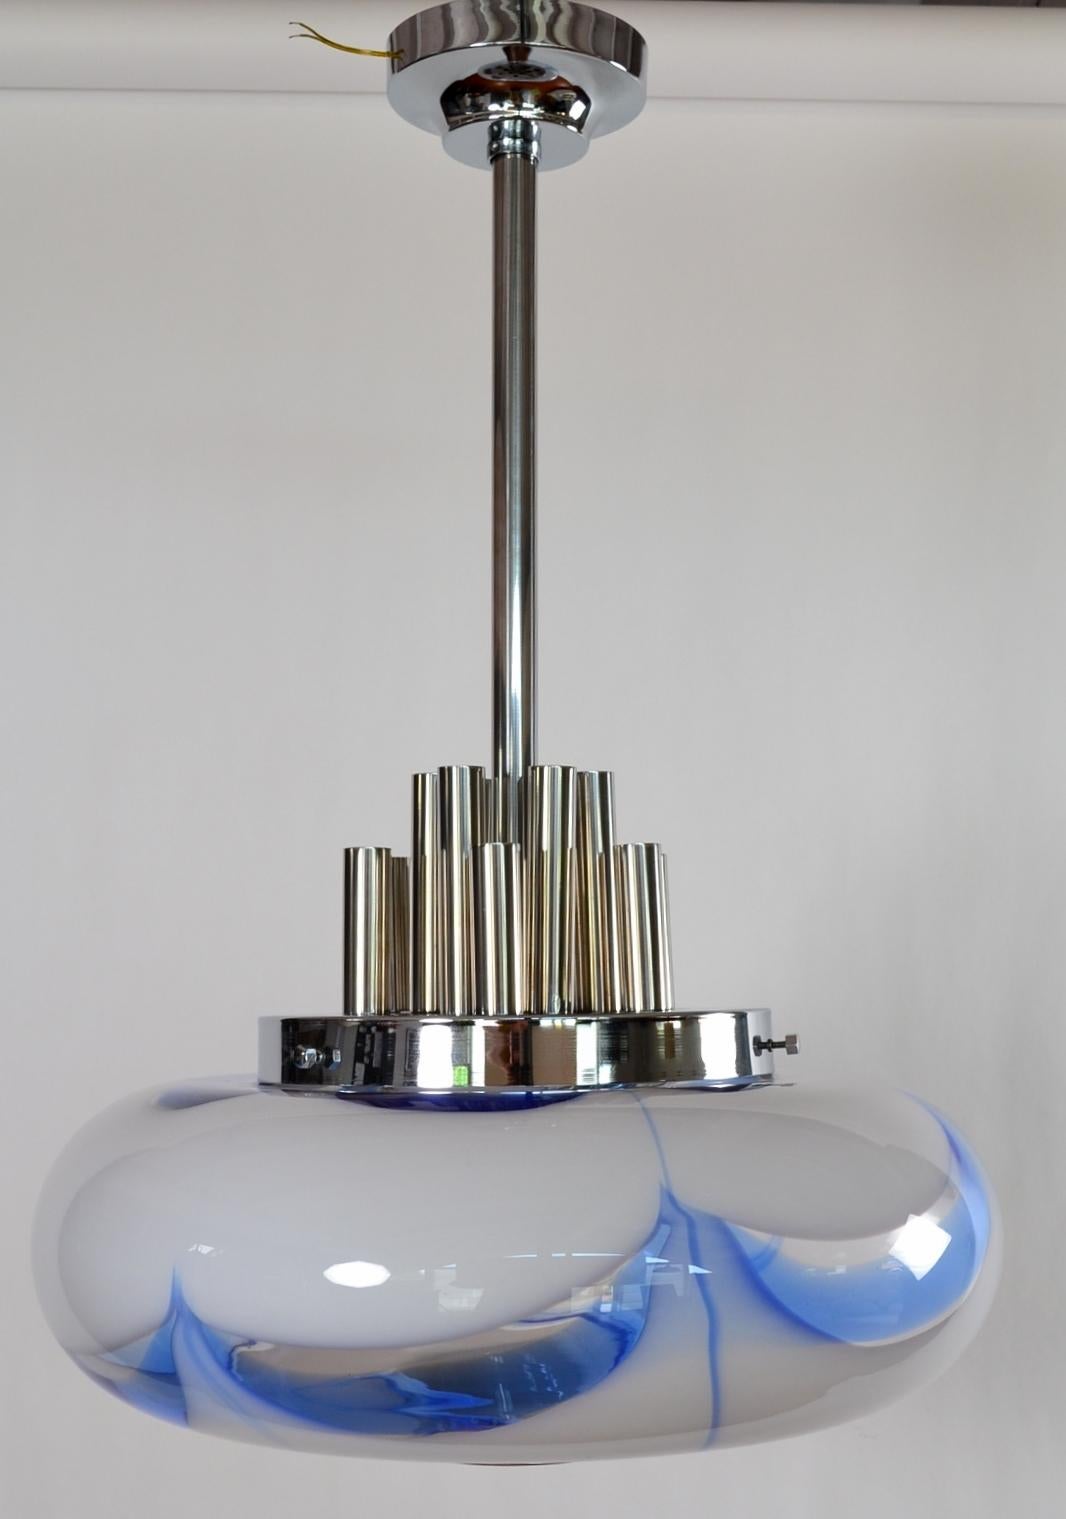 Gorgeous and large hand blown pendant lamp with sky-blue and white crystal glass sphere produced in Murano, Italy during the 1970s.
The big Murano glass in shiny white and blue is beautiful when illuminated and leaves magic effects in every